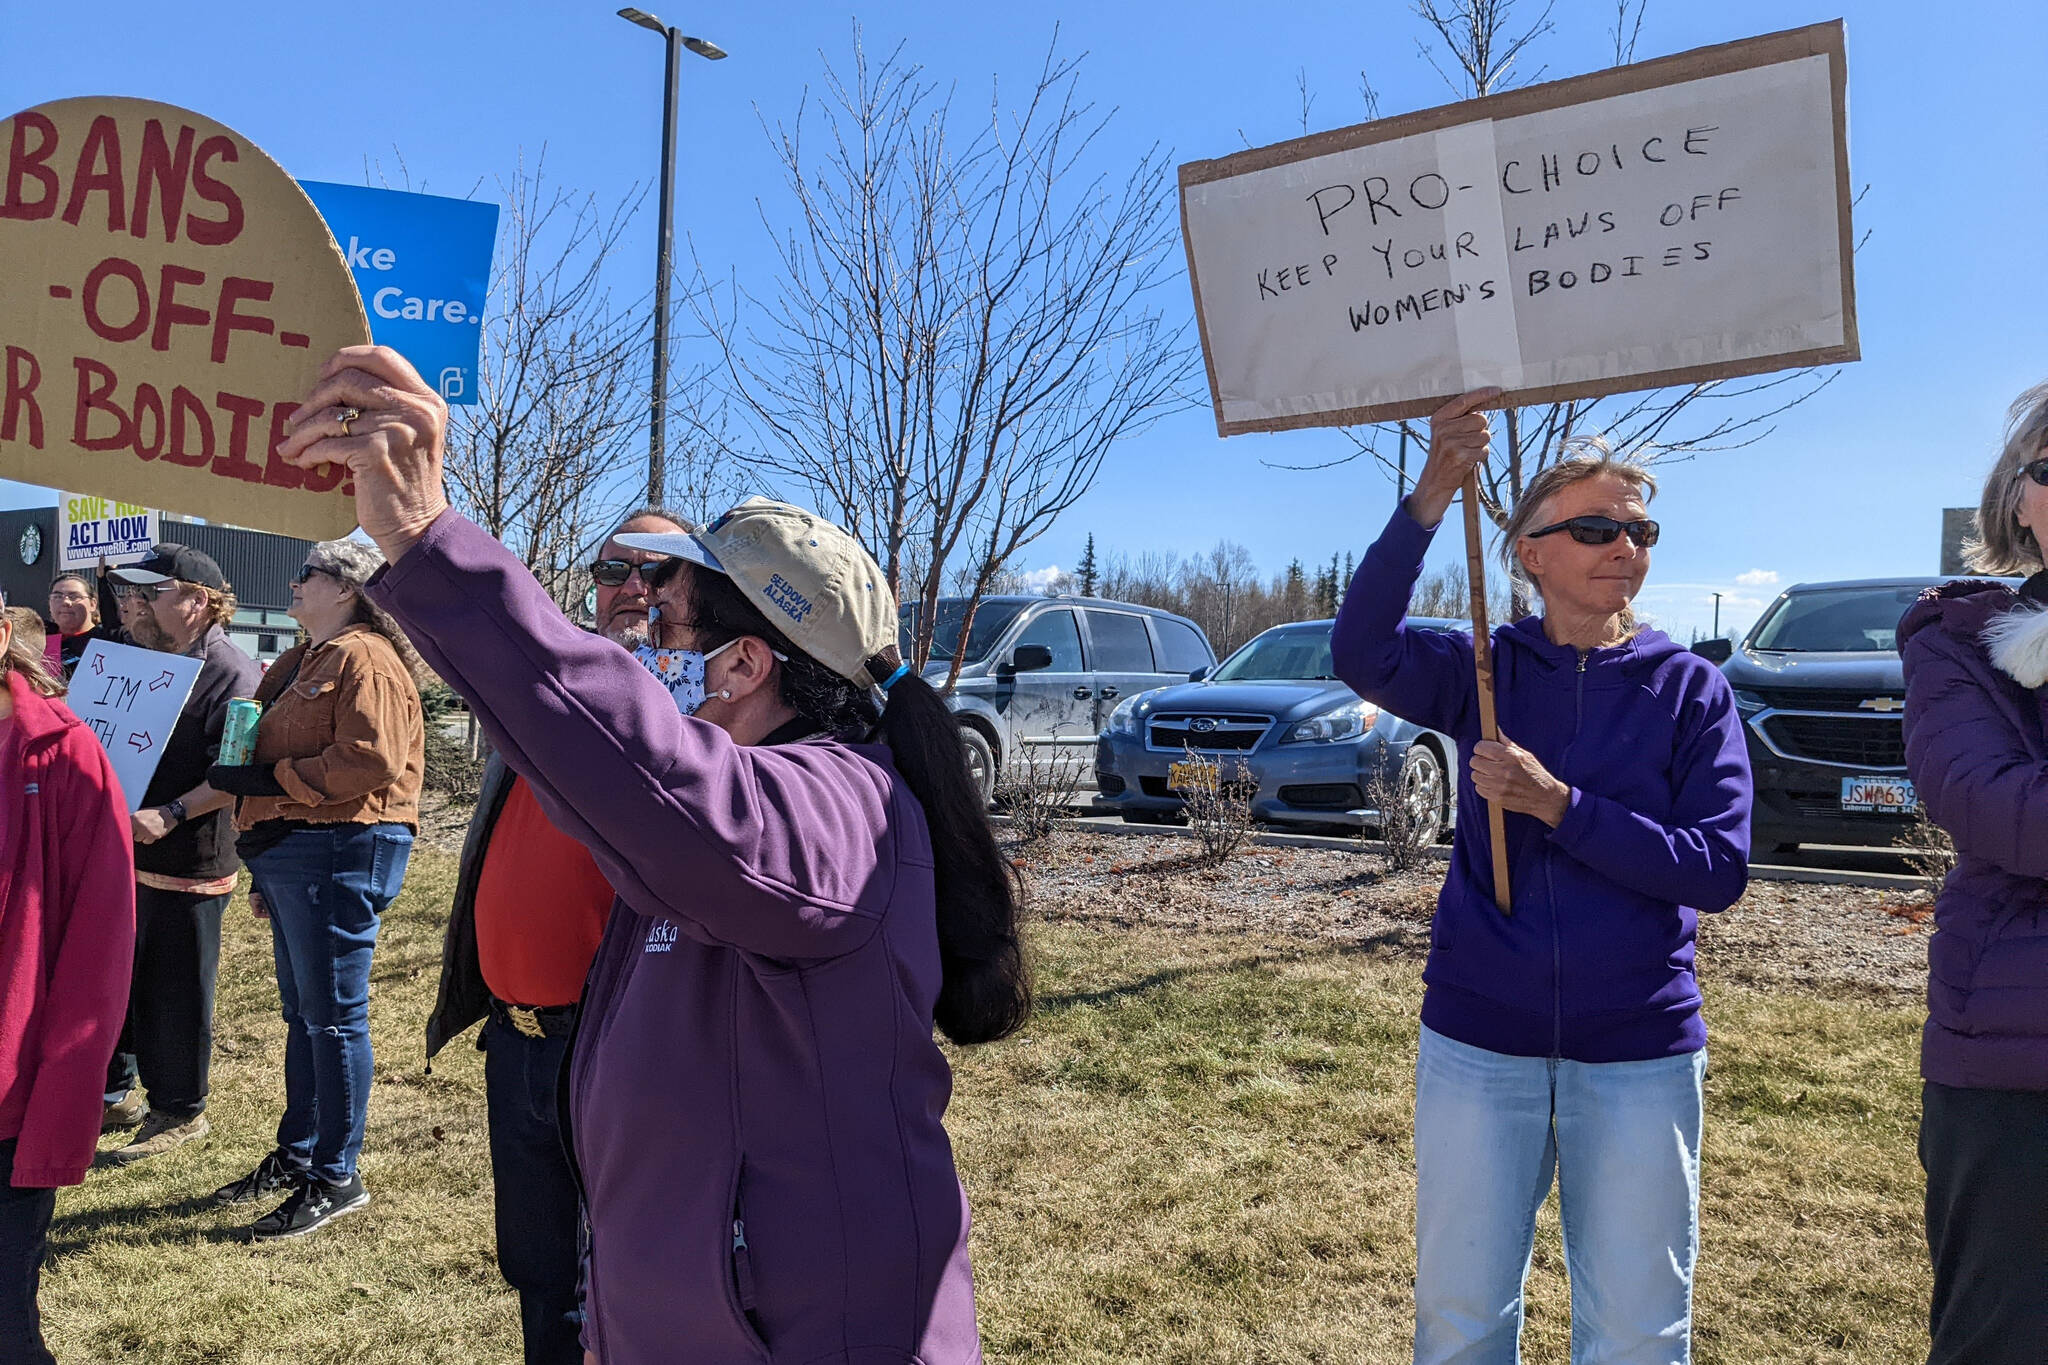 Demonstrators in support of abortion rights stand at the intersection of the Kenai and Sterling highways on Saturday, May 7, 2022, in Soldotna, Alaska. (Photo by Erin Thompson/Peninsula Clarion)